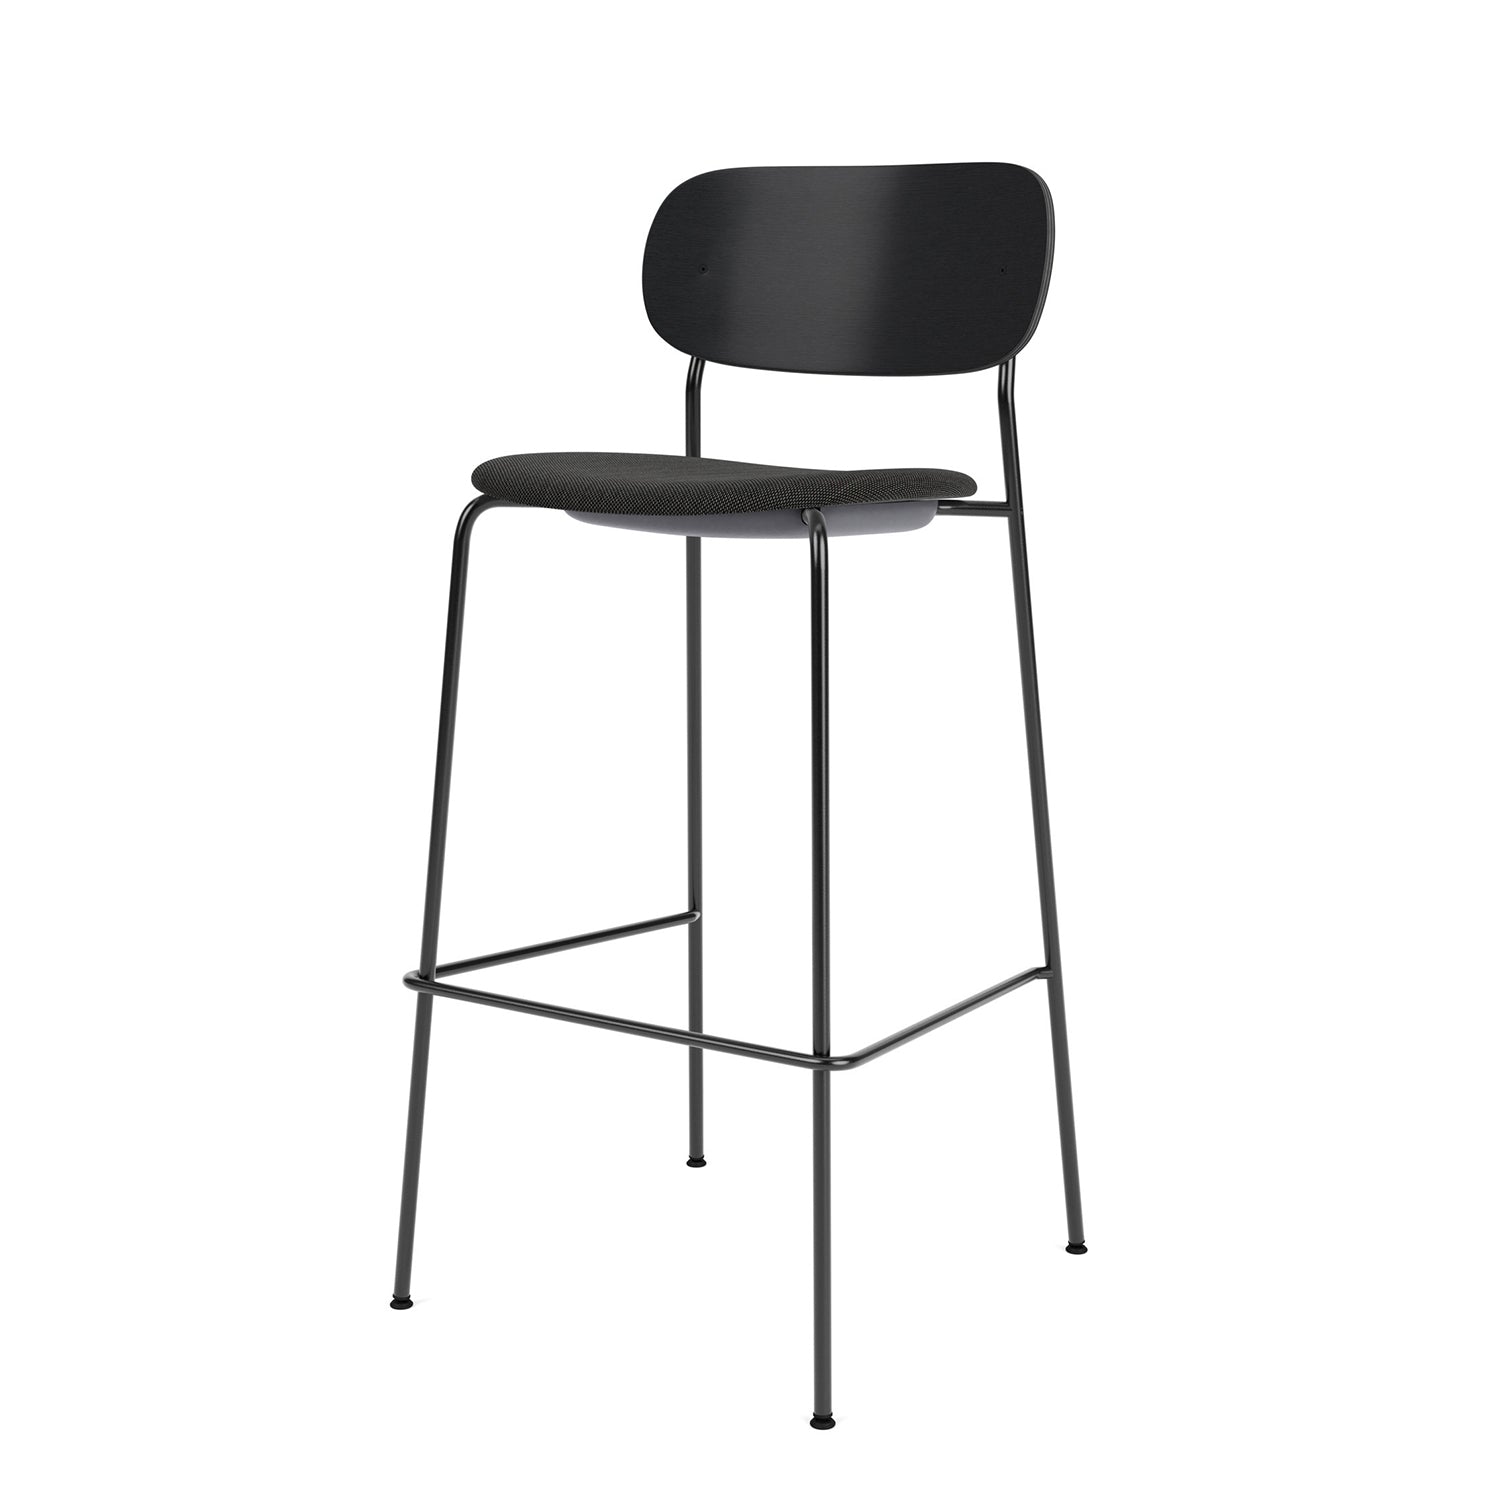 Co Bar Stool 75 Seat Upholstered - The Design Choice